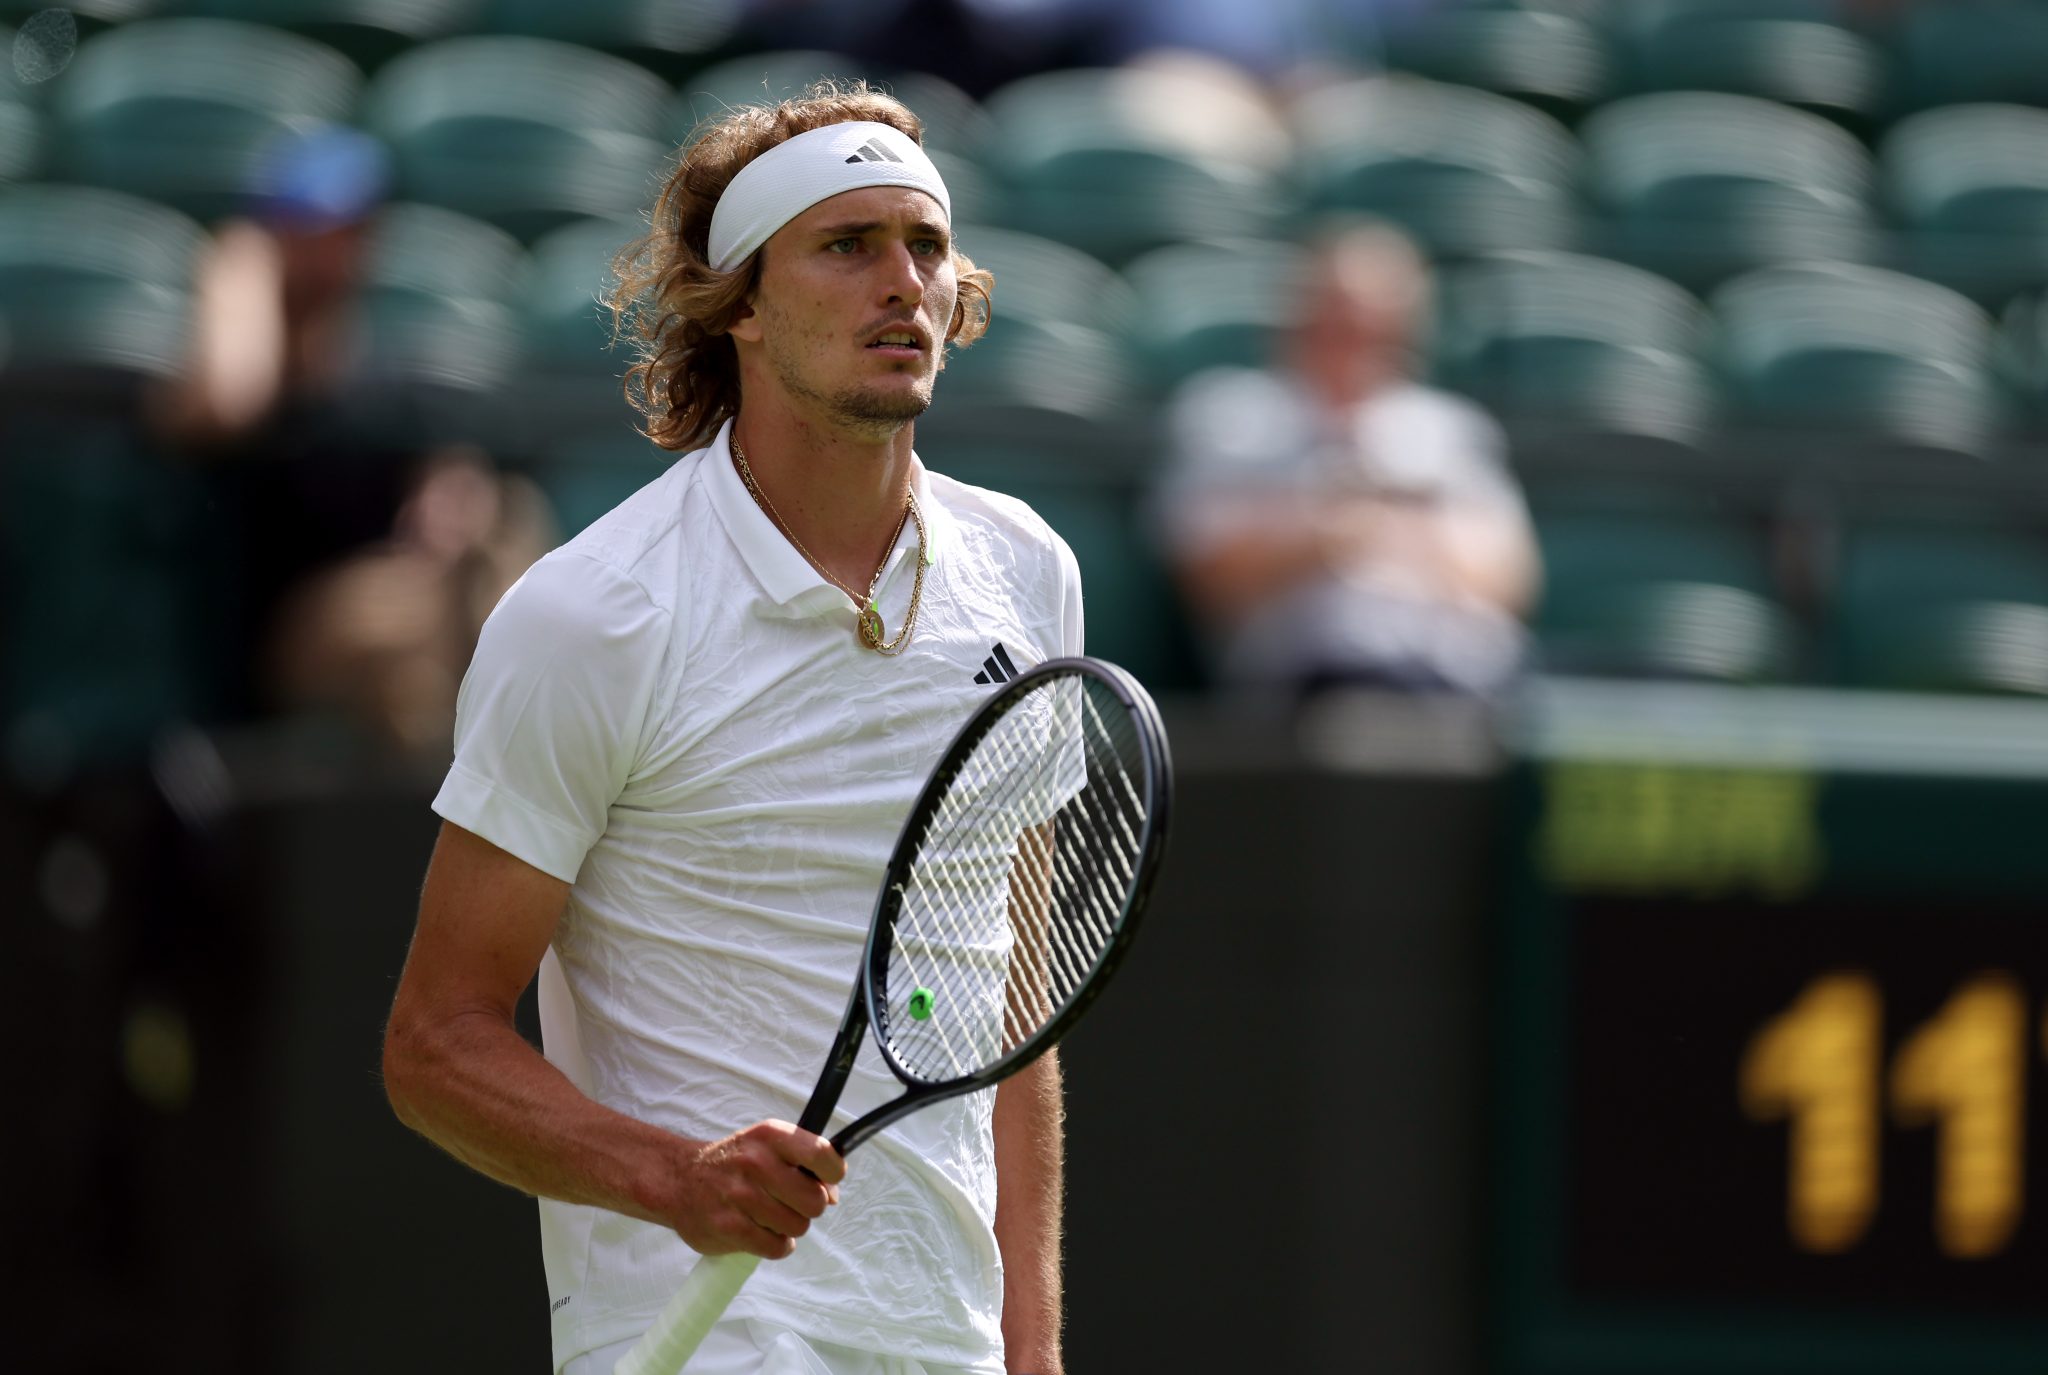 Alexander Zverev makes up for lost time by easing through Wimbledon opener